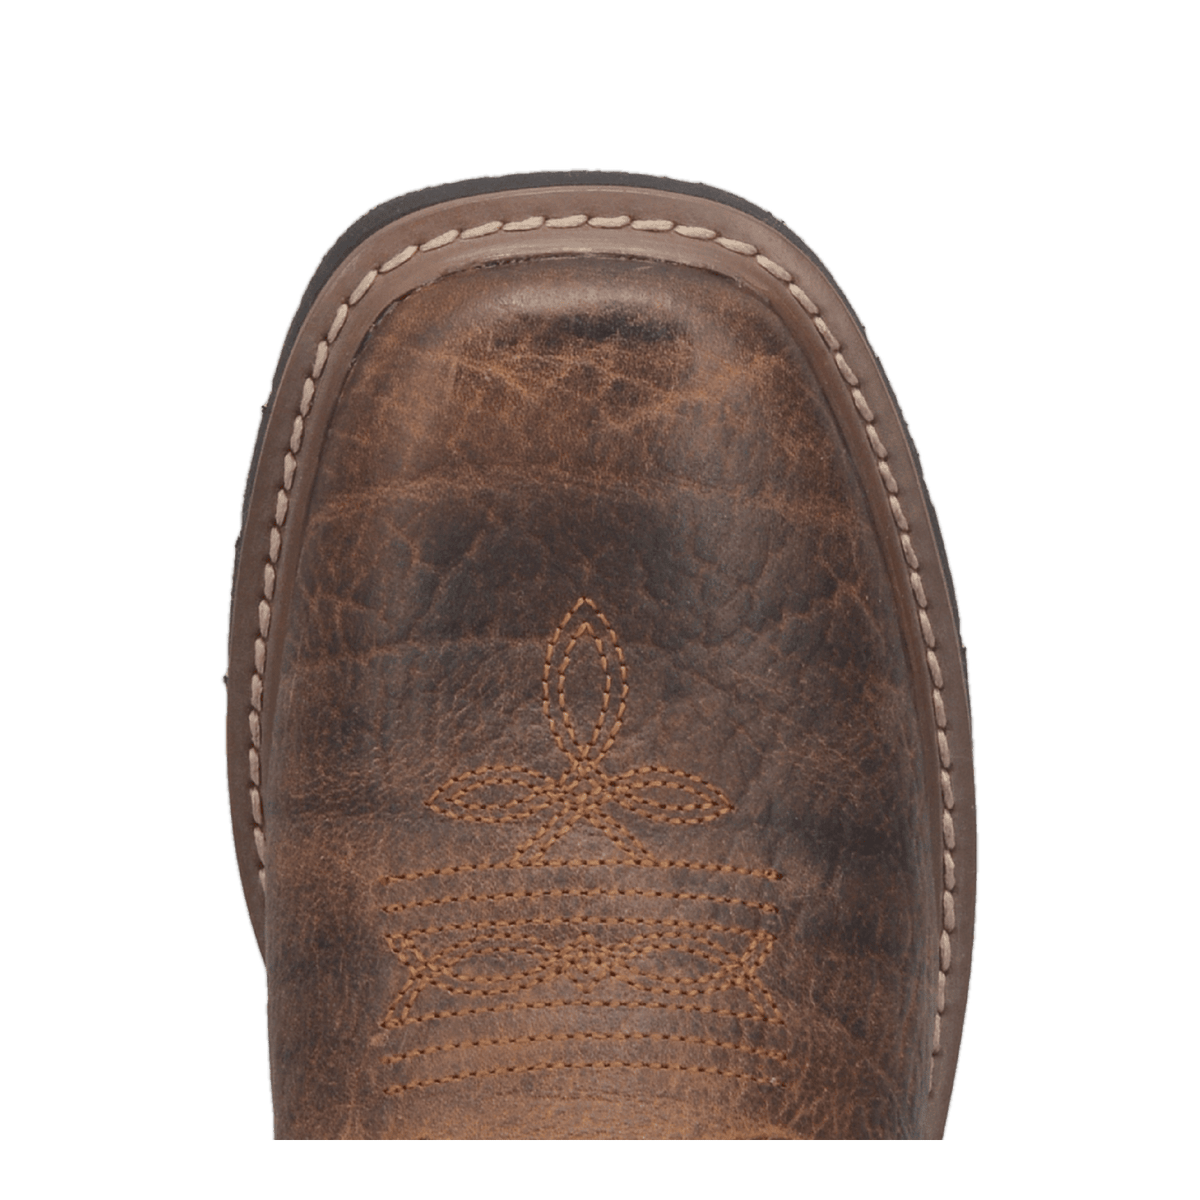 BRANTLEY LEATHER YOUTH BOOT Image